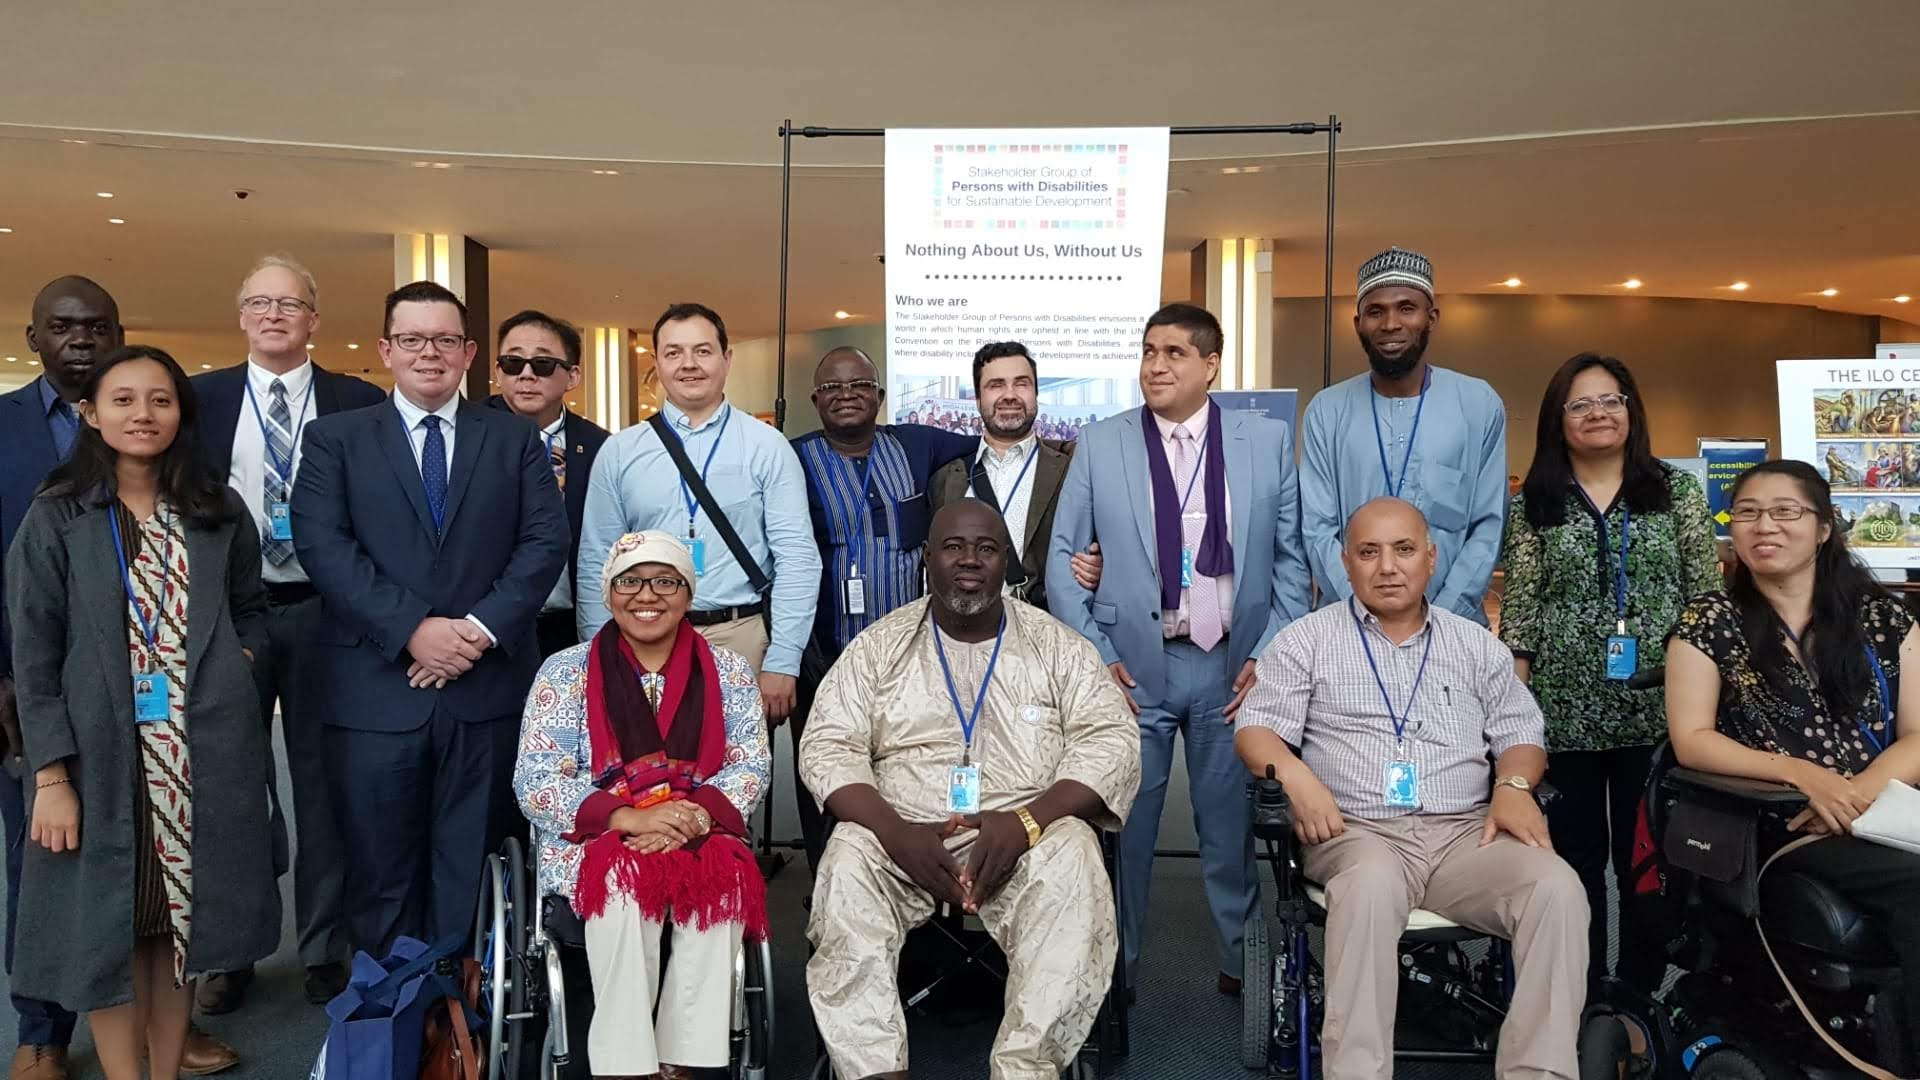 group photo of the 2019 Stakeholder Group of Persons with Disabilities at the United Nations NY